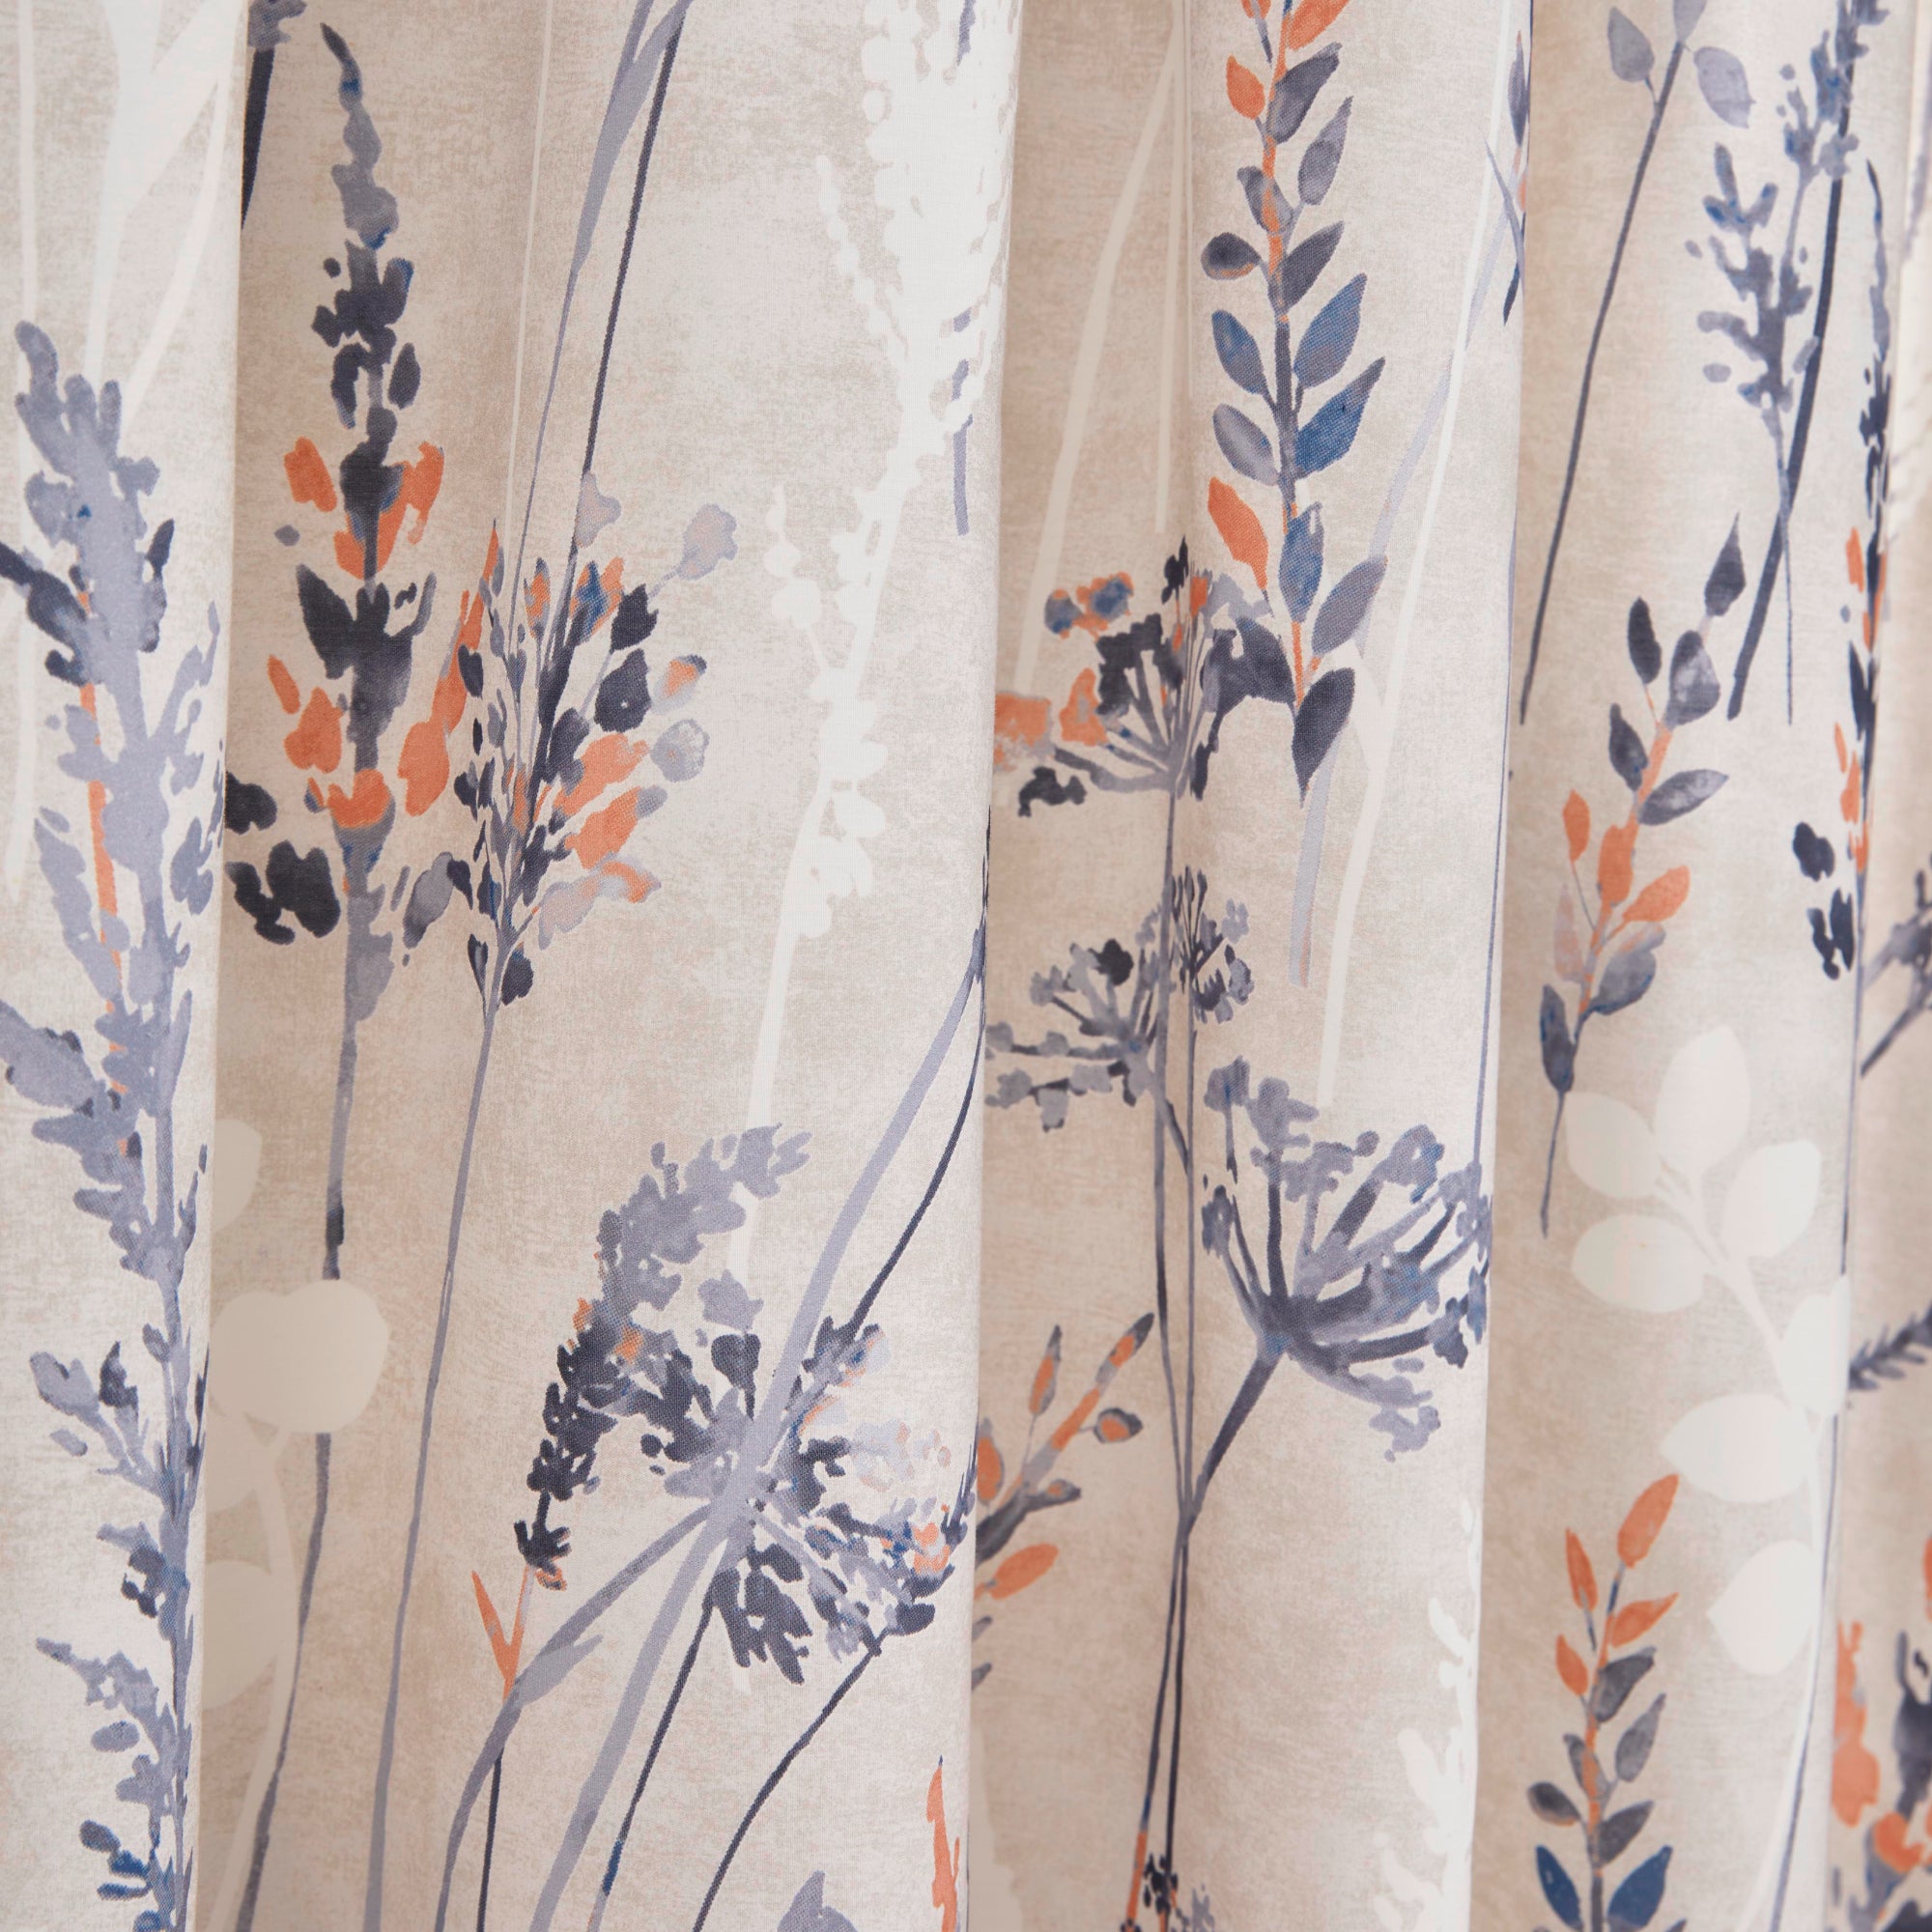 Pair of Pencil Pleat Curtains With Tie-Backs Wild Stems by Dreams And Drapes Design in Blue